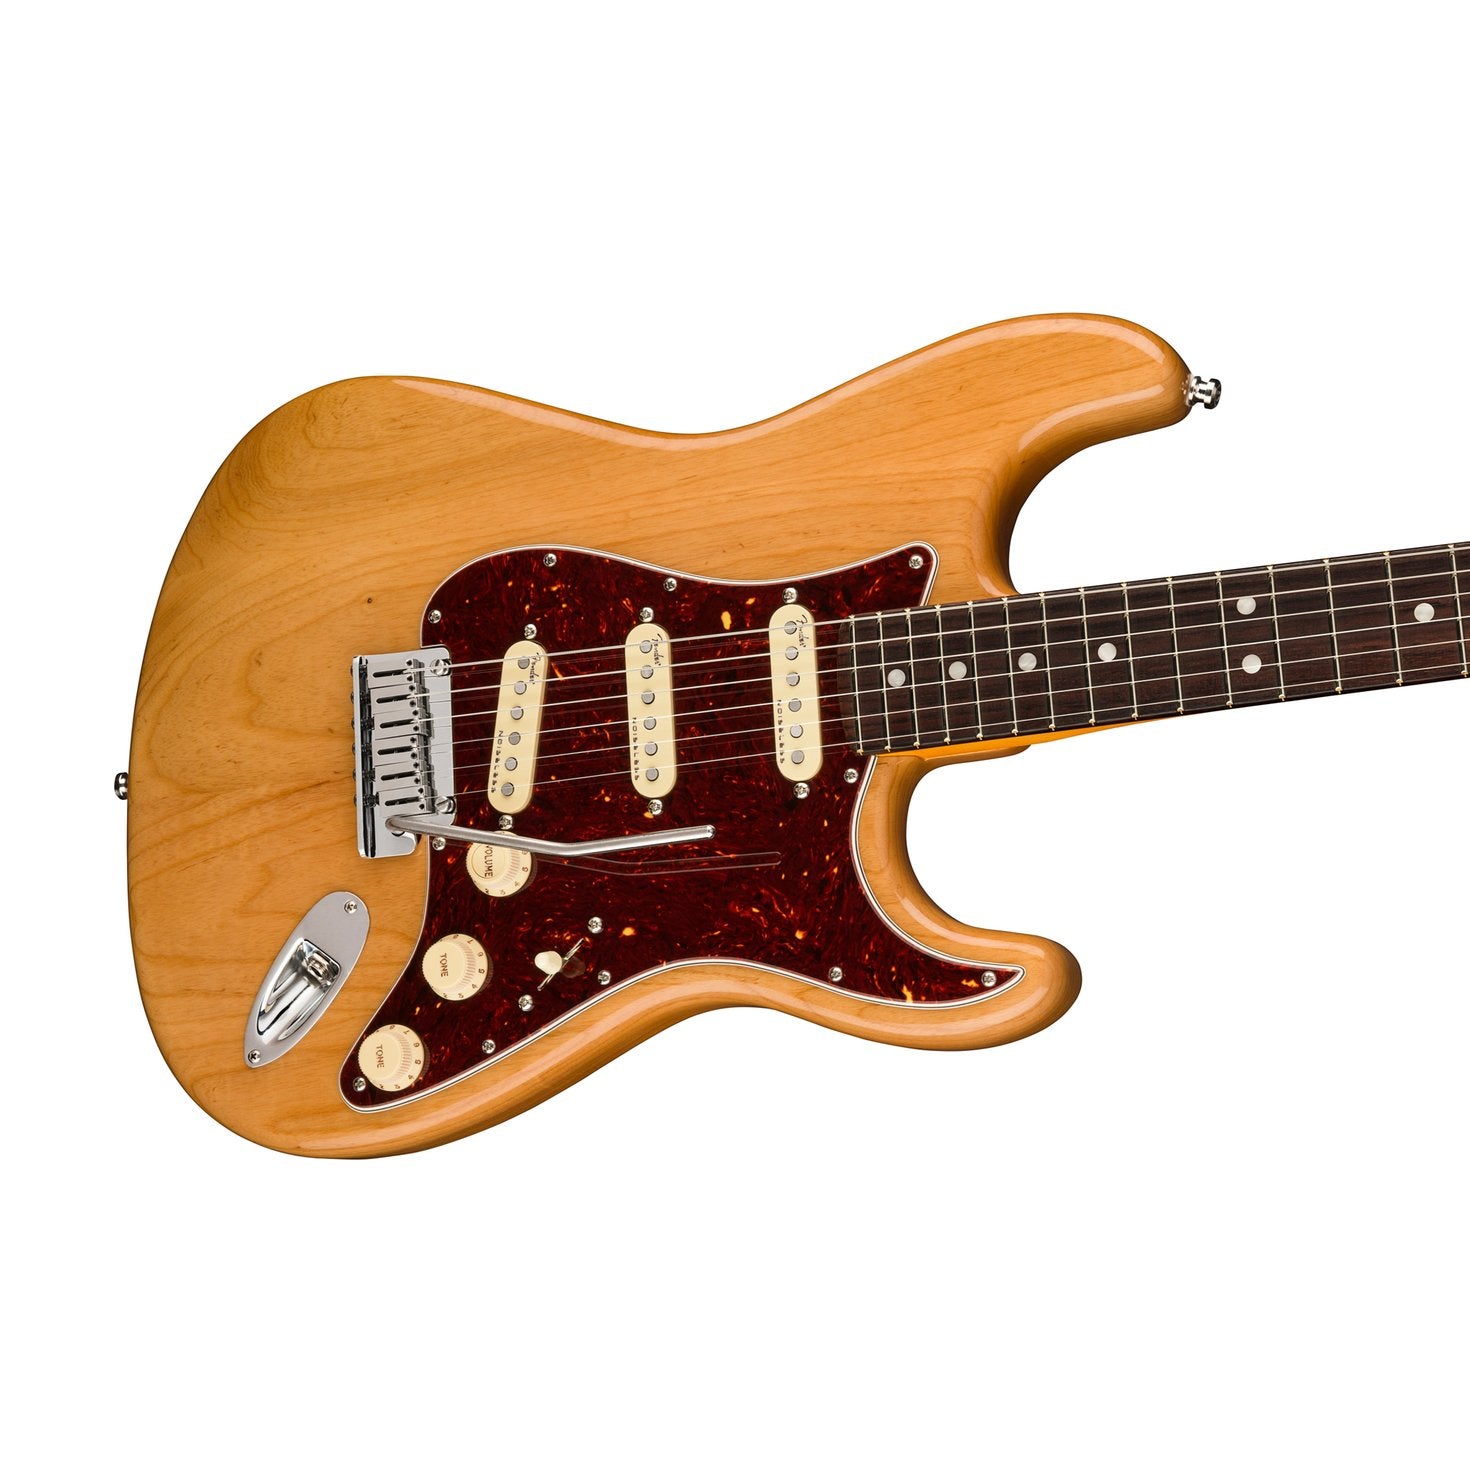 Fender American Ultra Stratocaster Electric Guitar, RW FB, Aged Natural, FENDER, ELECTRIC GUITAR, fender-electric-guitar-f03-011-8010-734, ZOSO MUSIC SDN BHD